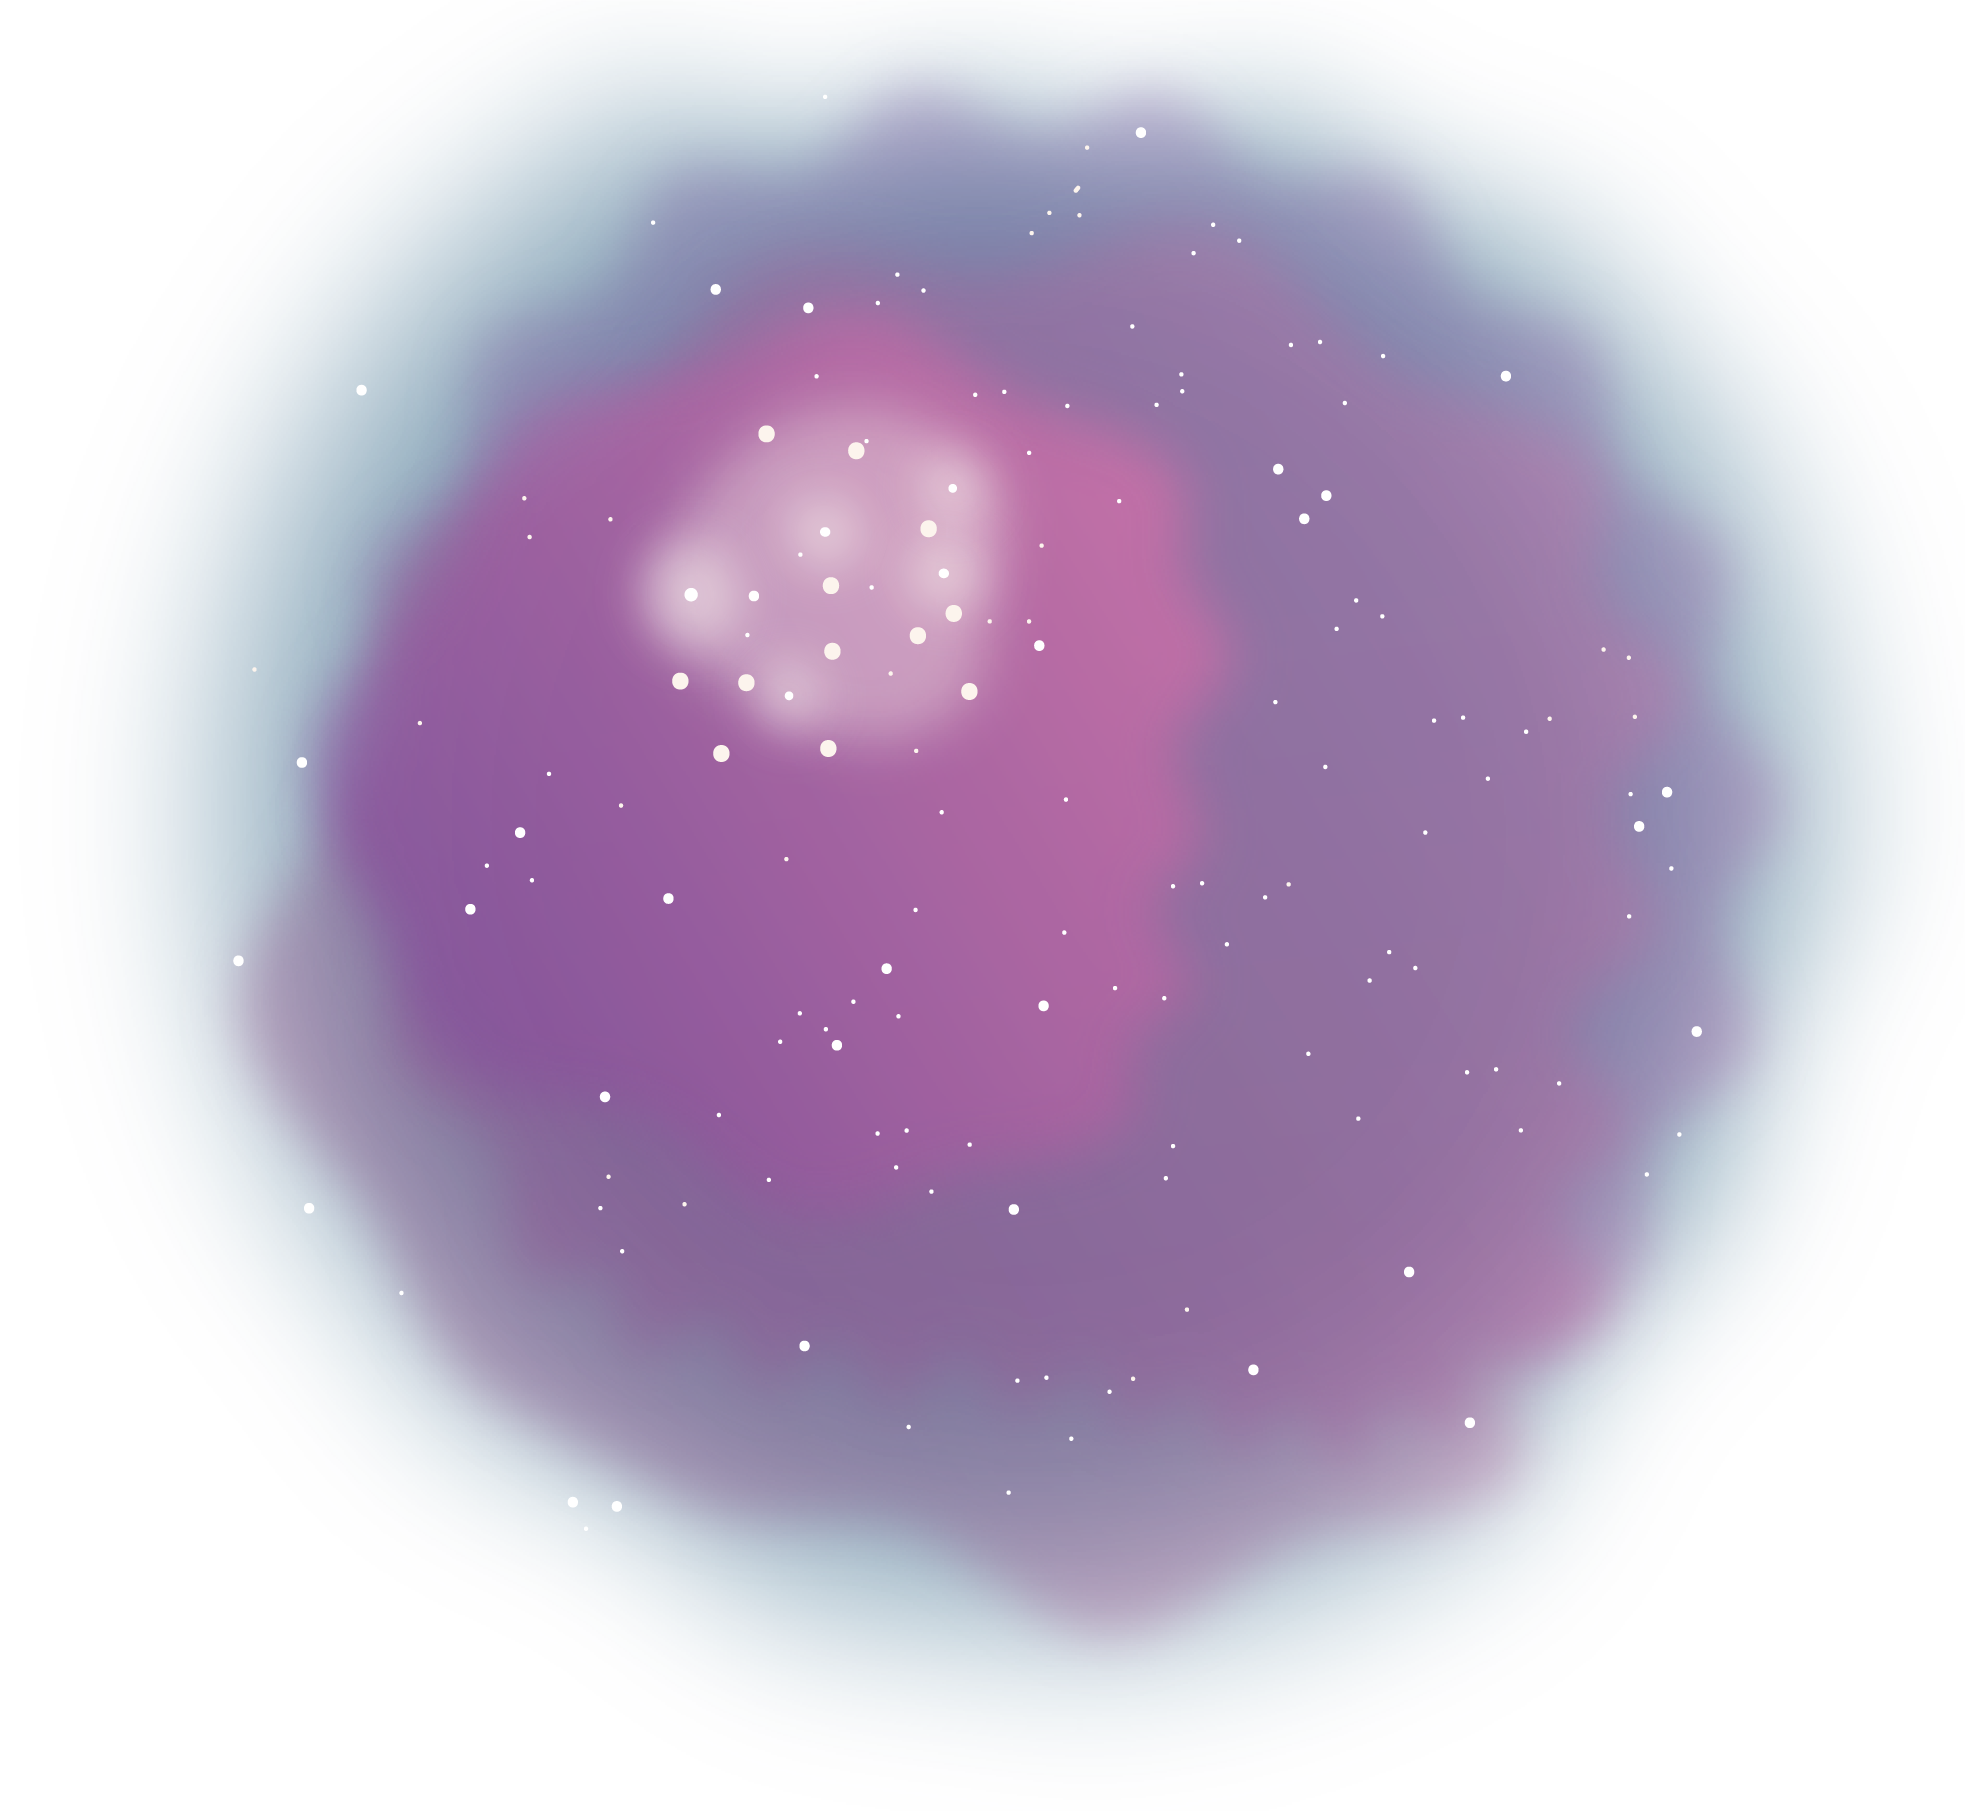 A large, amorphous blob in a circular shape has layers of transparent, hazy color overlapping. The different layers start with a slight blue and dark purple around the outer rim and move inward to brighter purples. While white dots representing stars speckle the whole image, in the upper left part of this shape is a bright white circular cloud with more pronounced and larger stars grouped together.